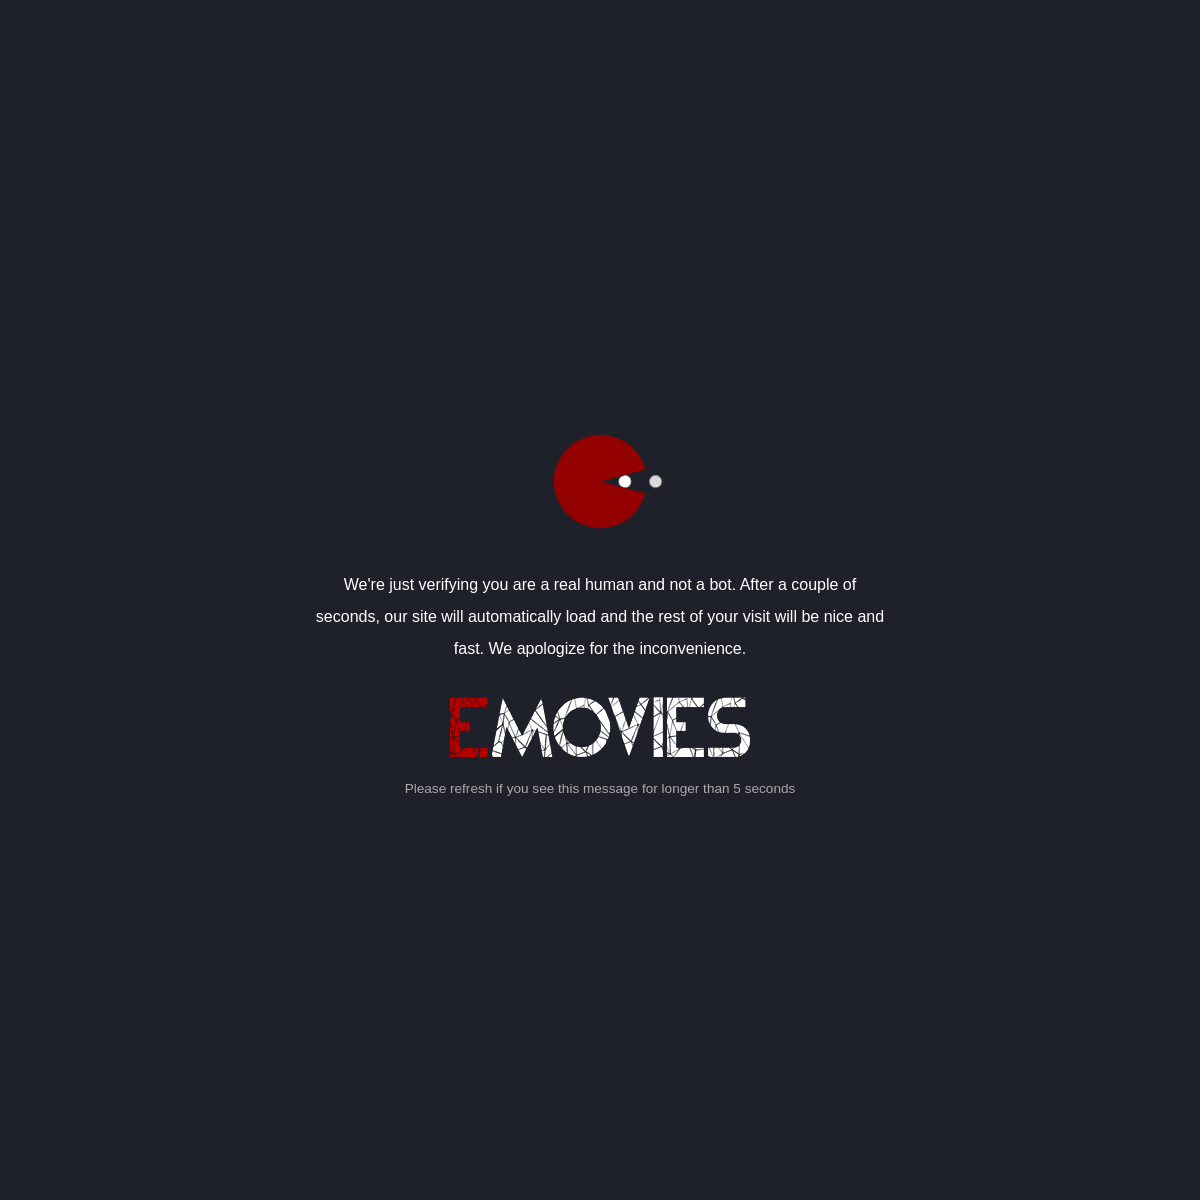 A complete backup of https://emovies.io